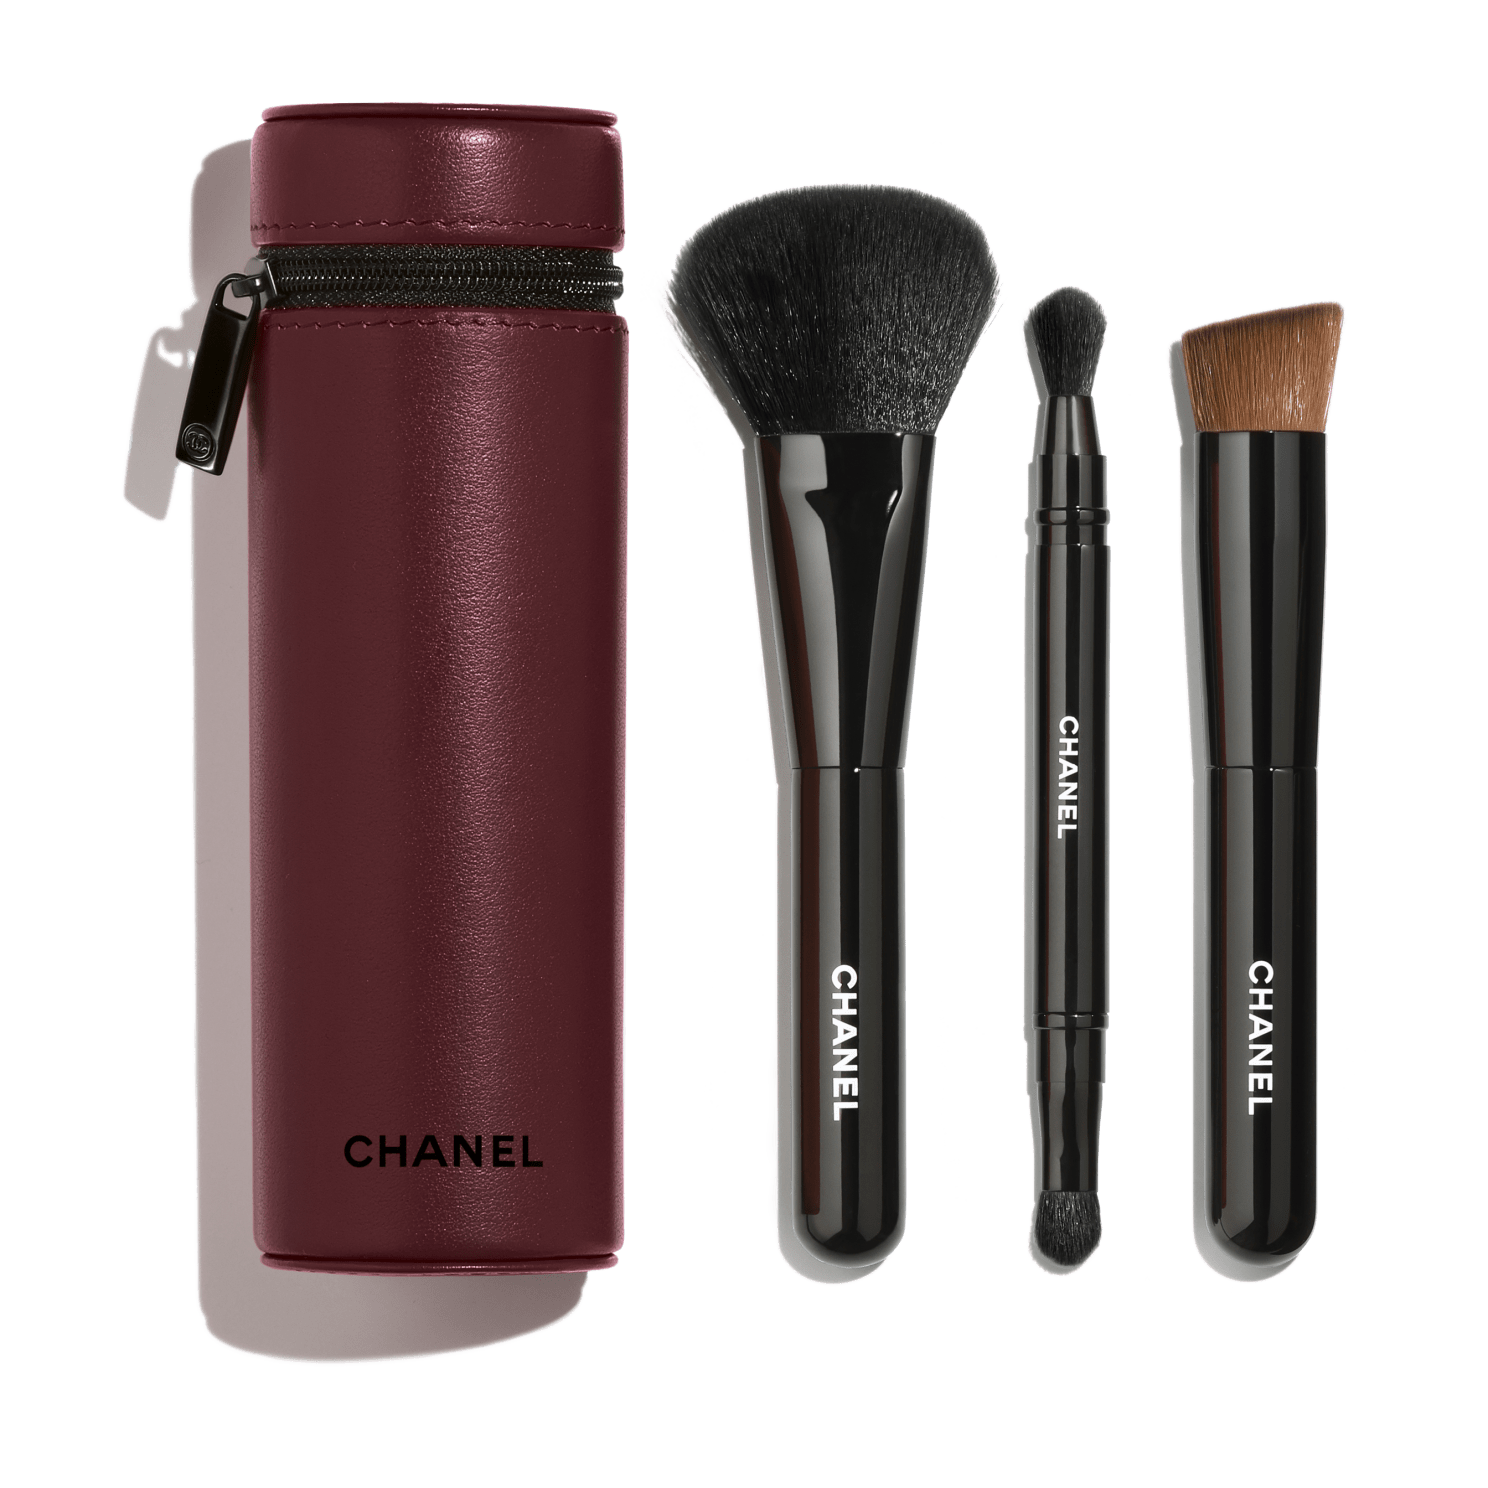 Chanel Collection of 3 Essential Brushes